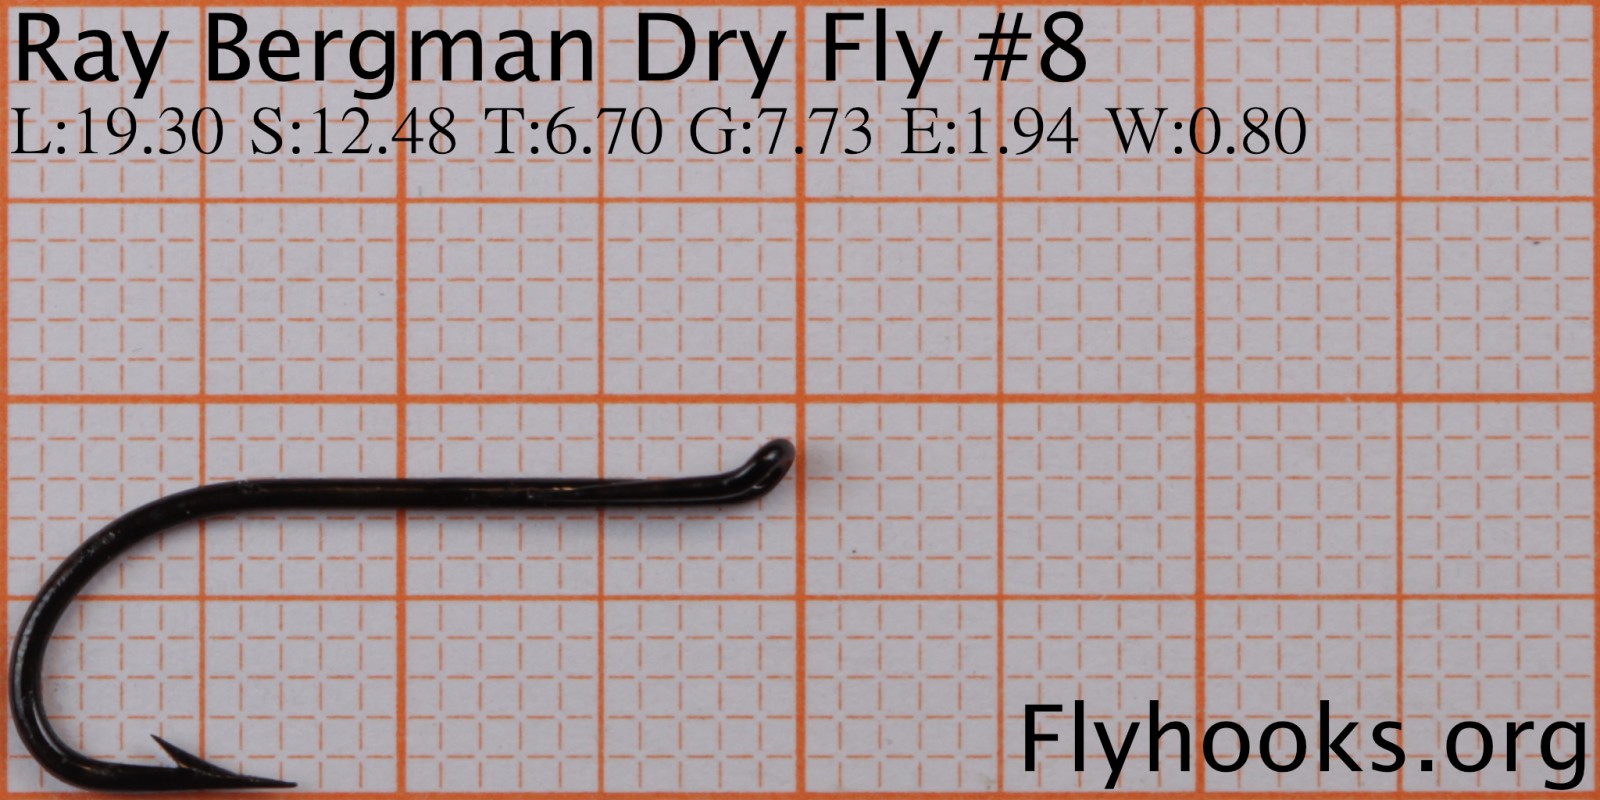 Dry Fly - Salmon